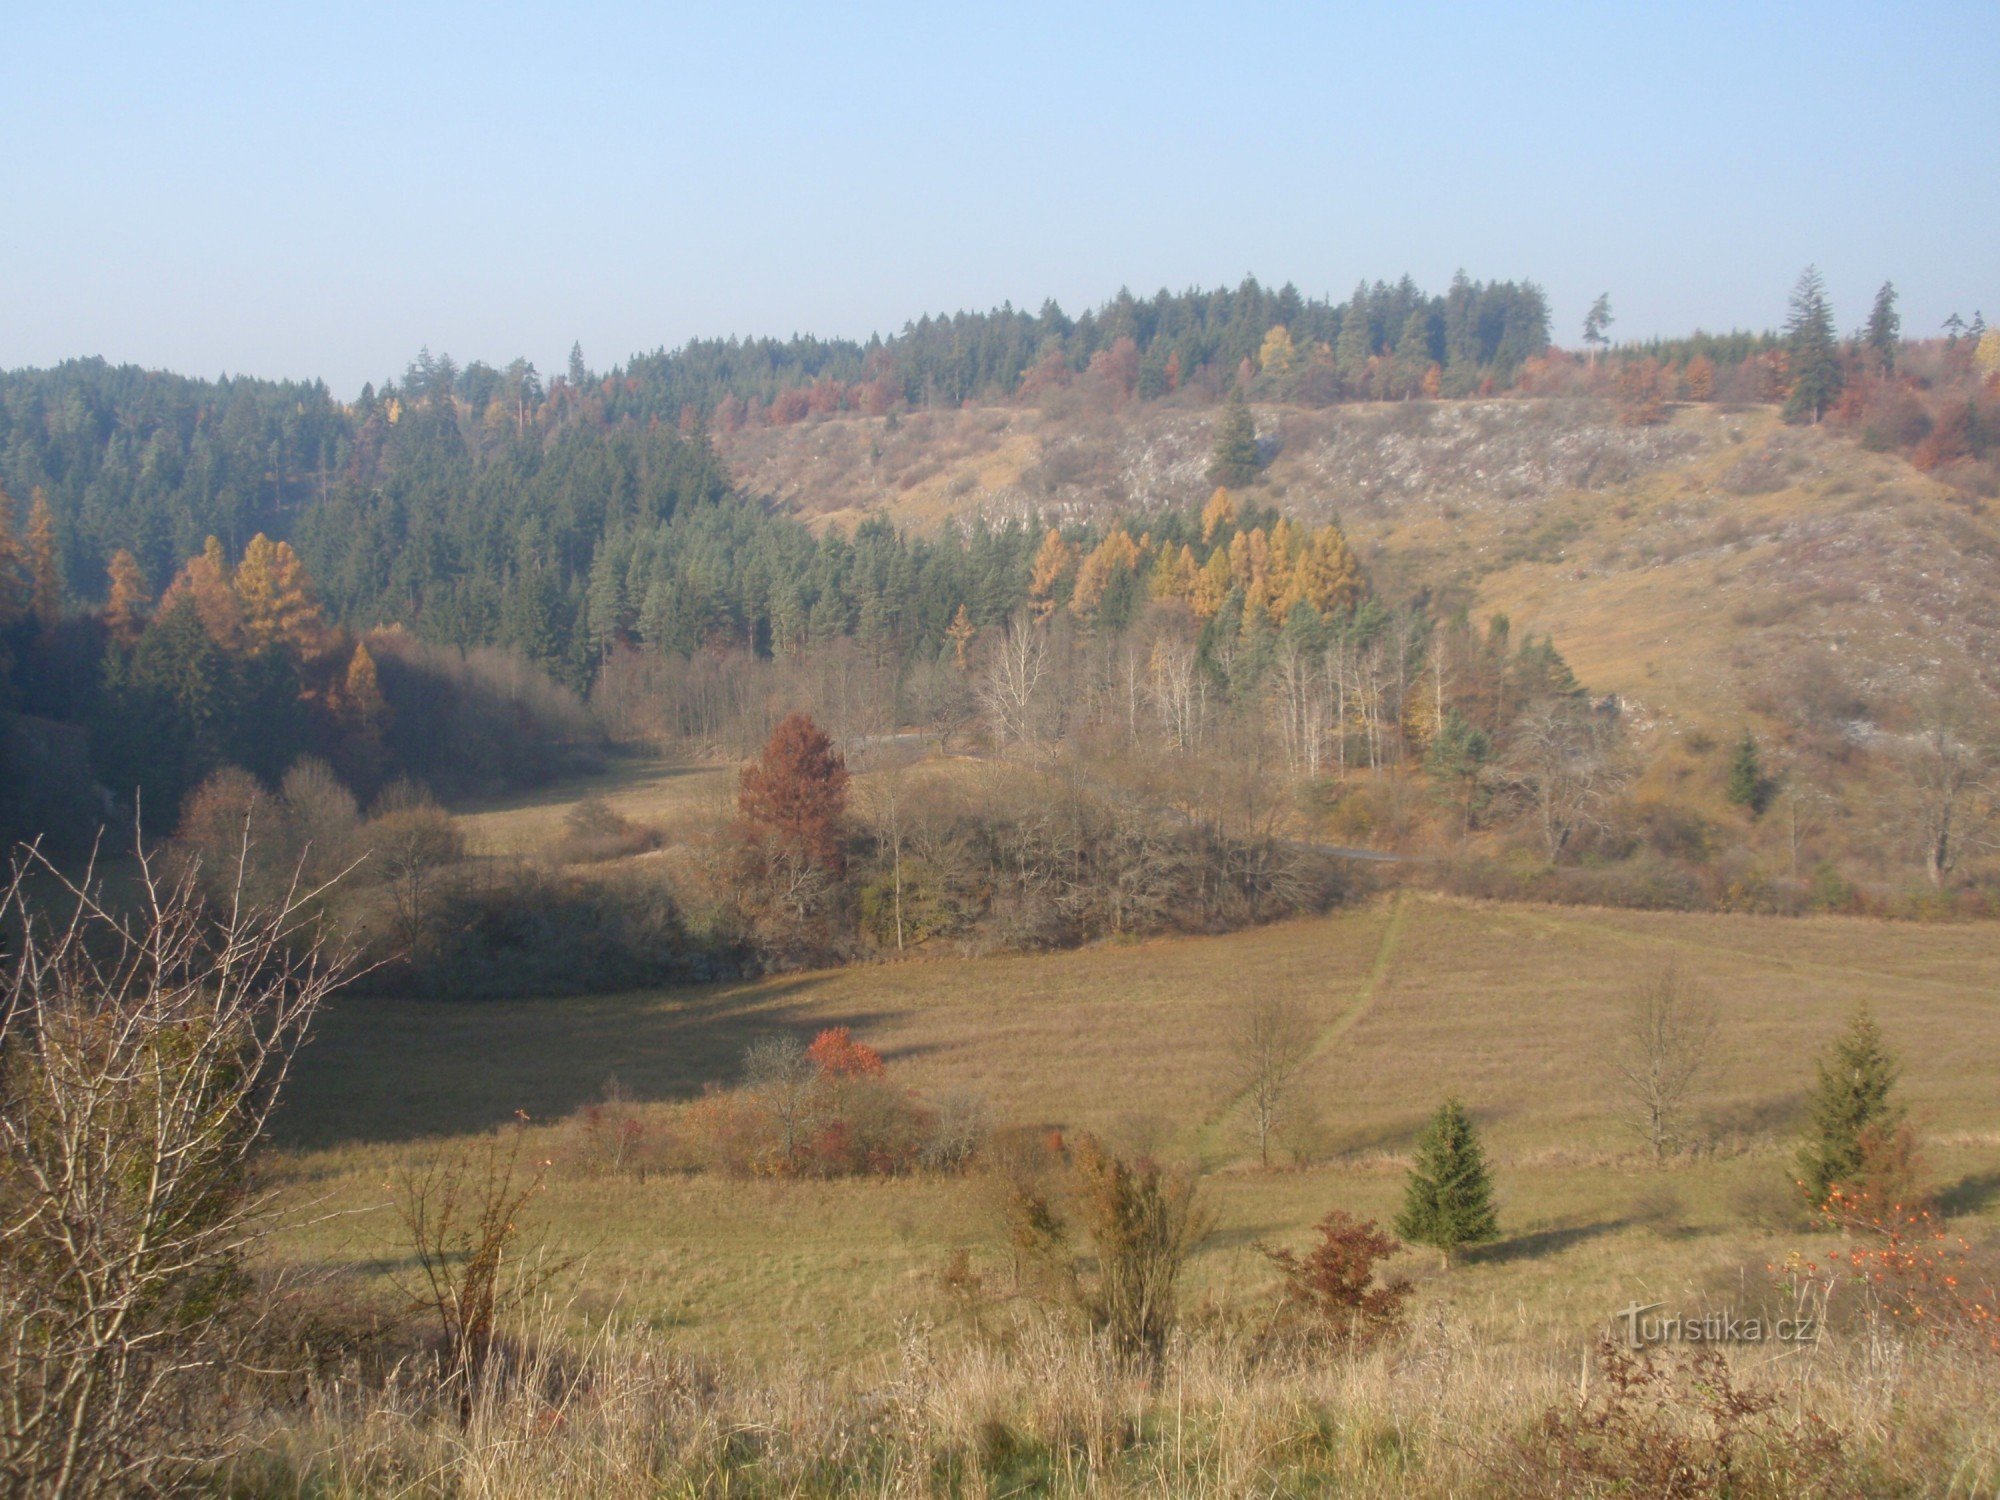 Autumn Macocha is finally free again, or from Vilémovice to Blansko